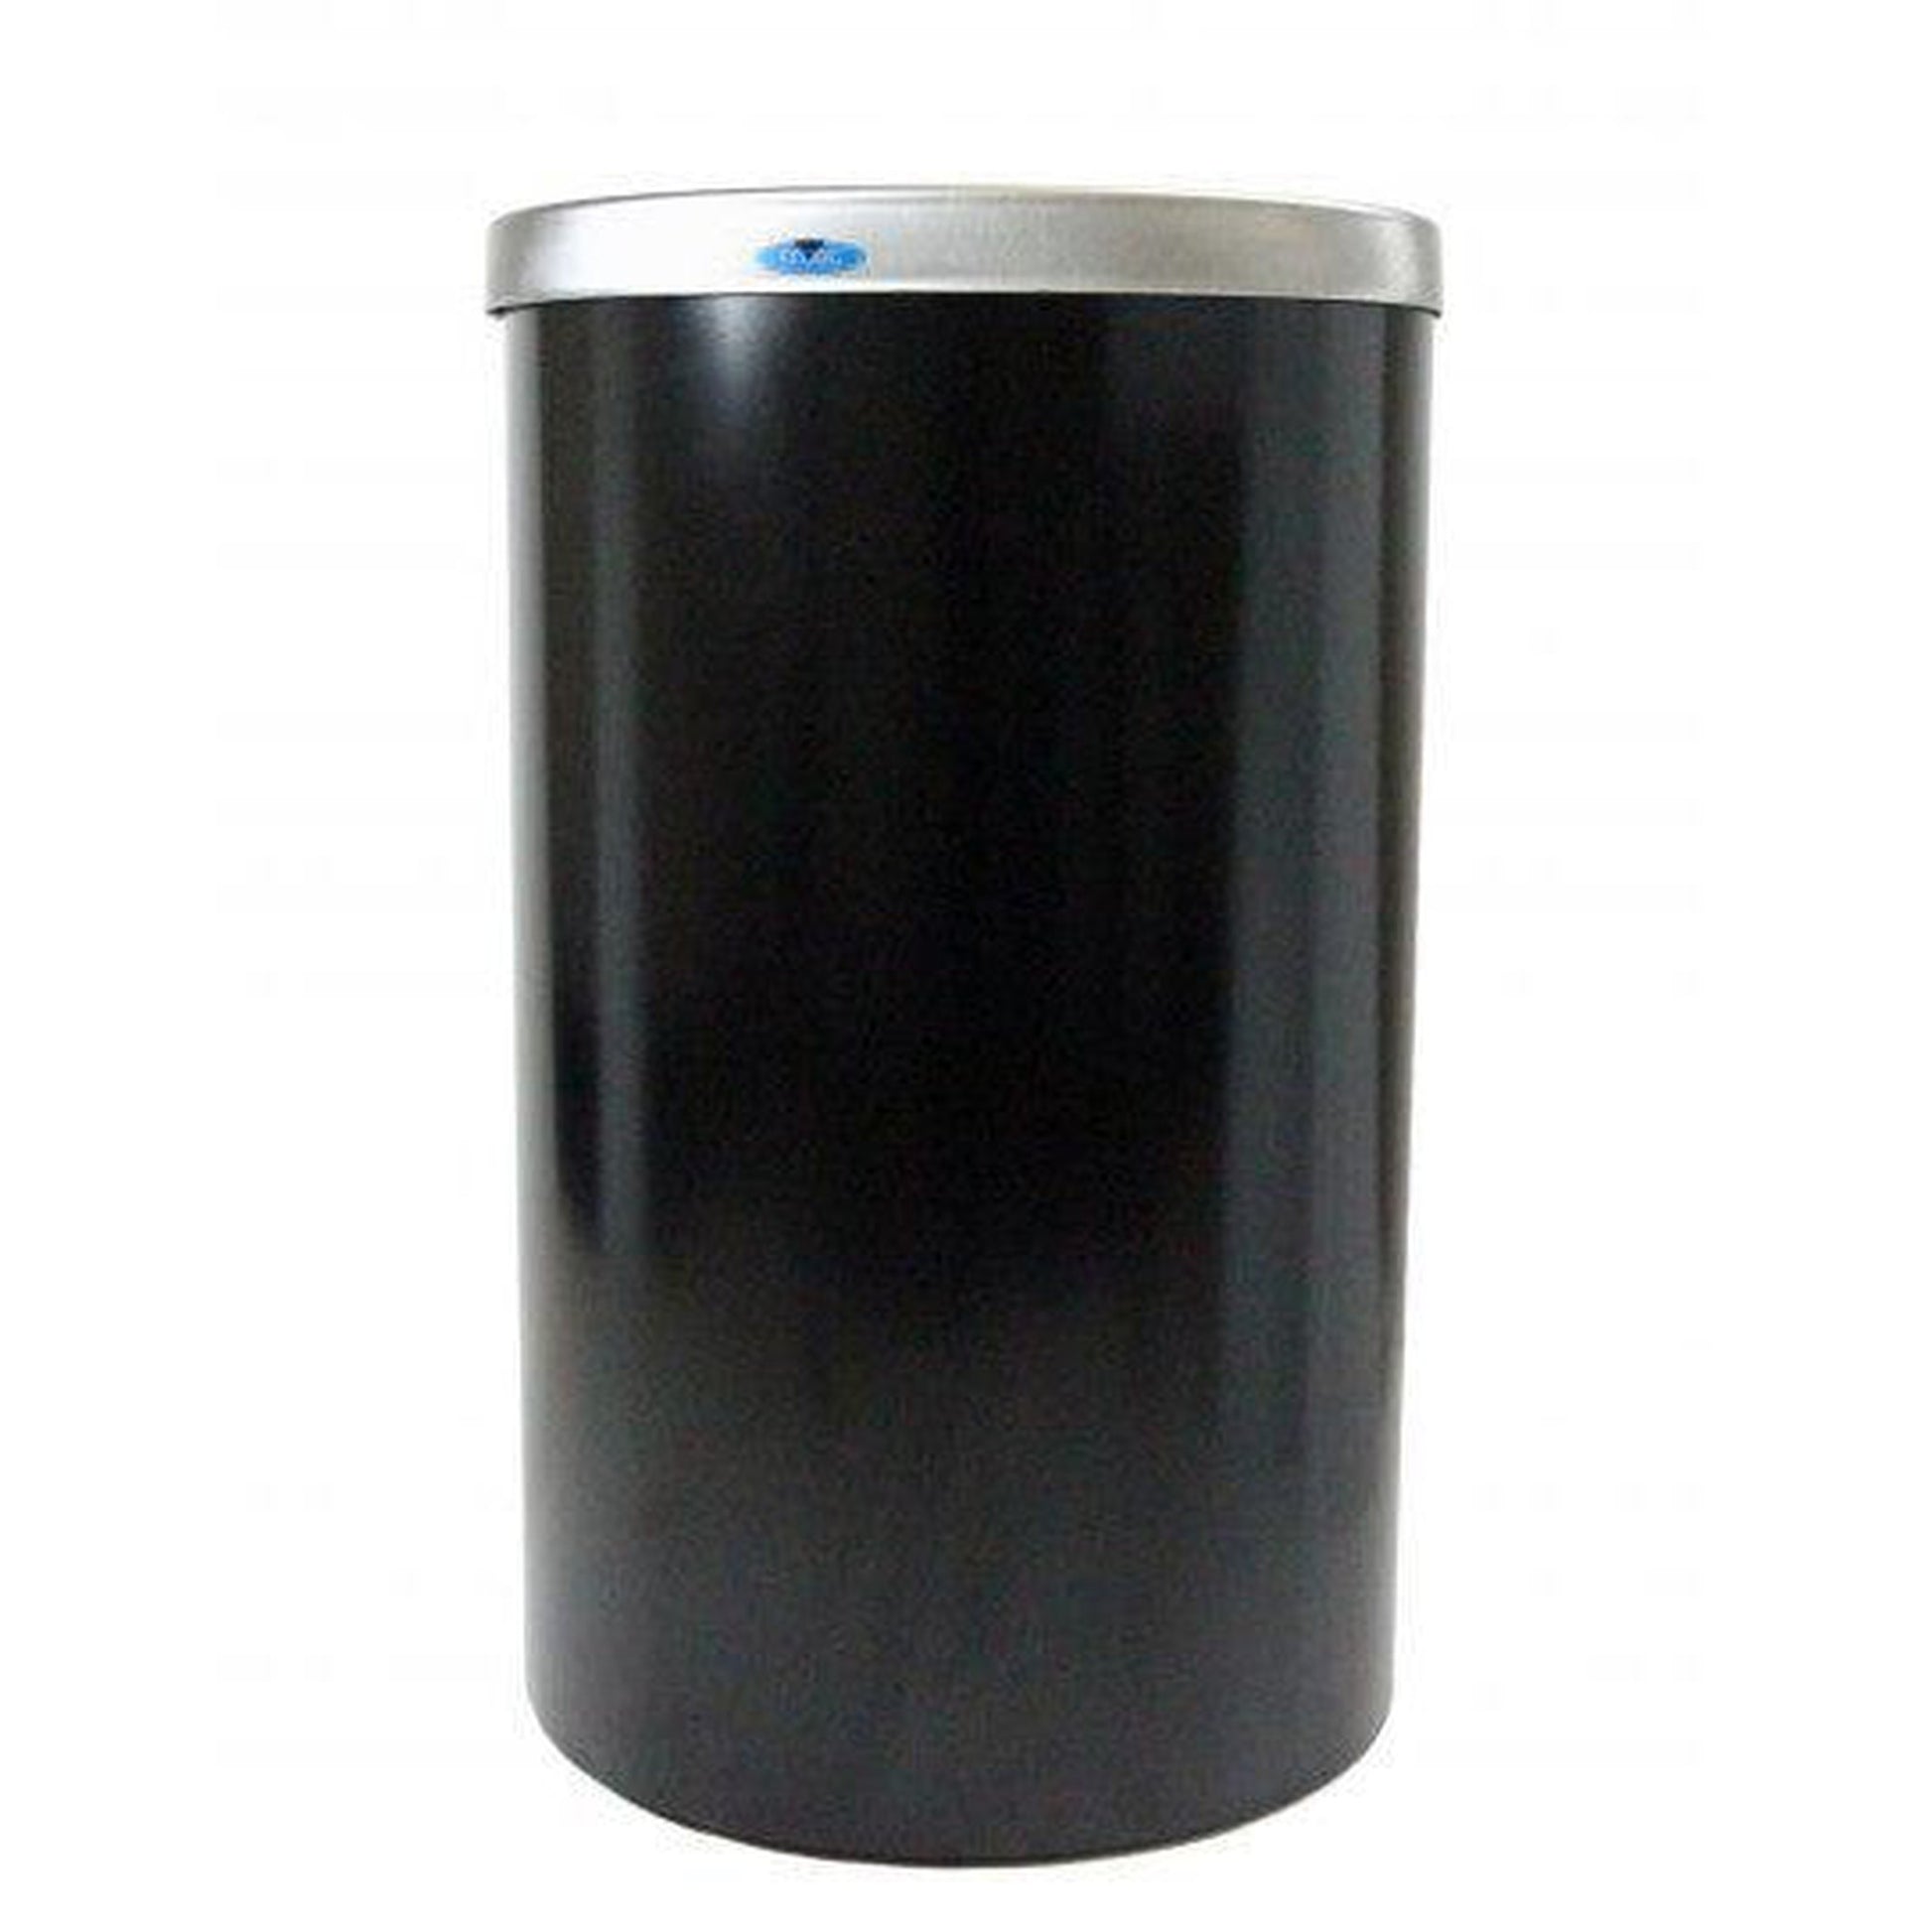 Frost 18.5 x 18.5 x 29.4 Black Powder Coated Waste Receptacles